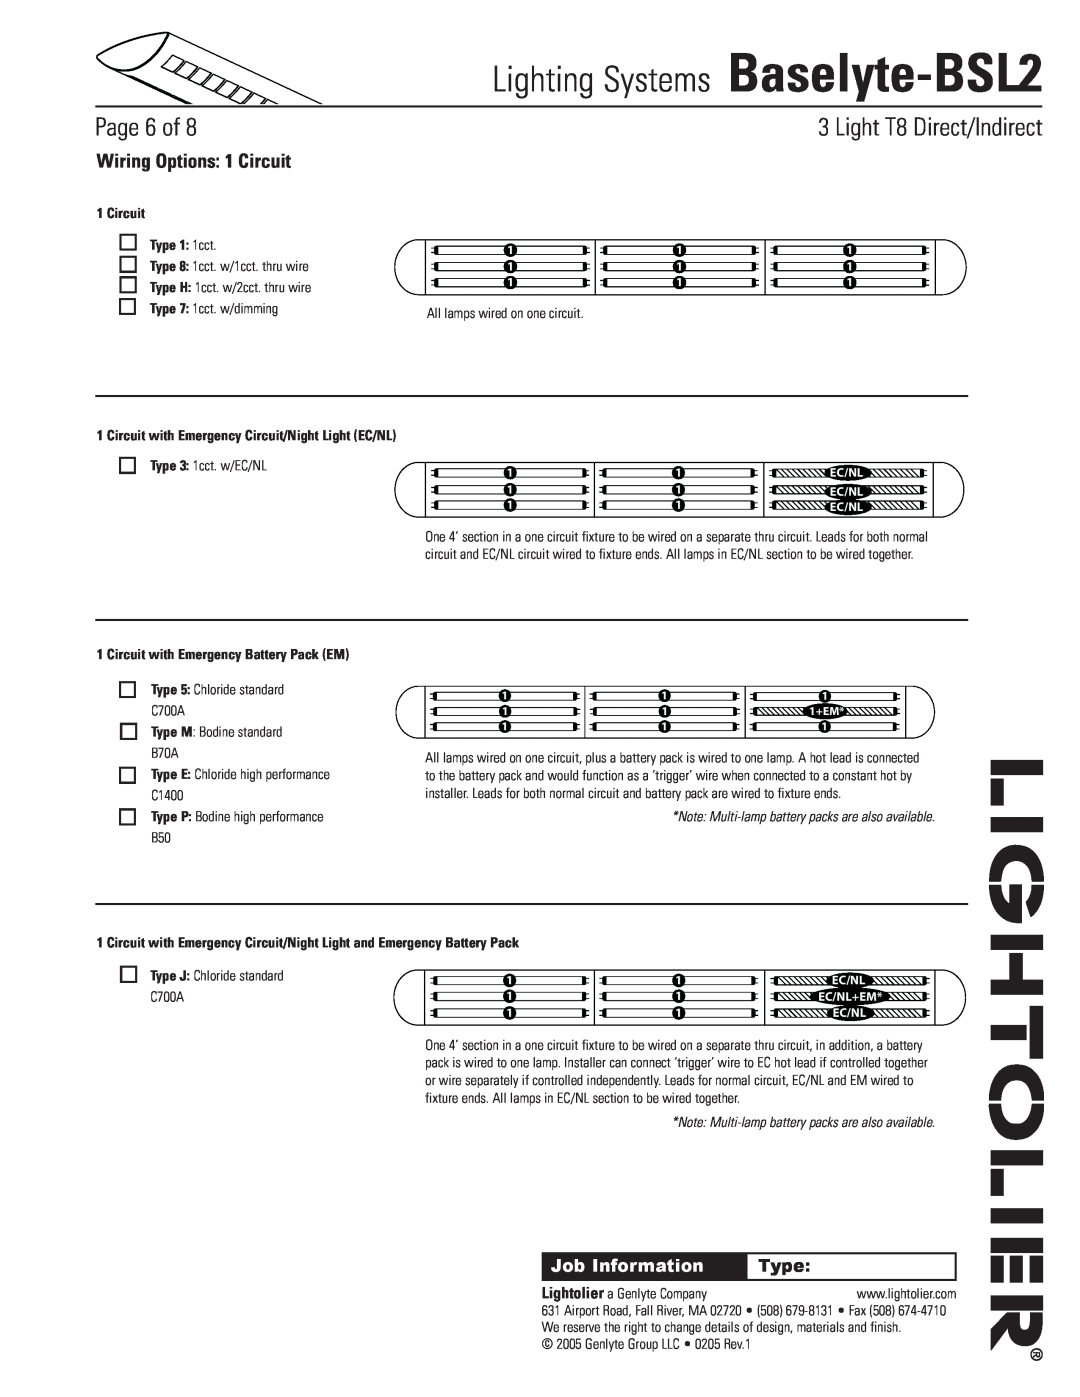 Lightolier Baselyte-BSL2 Wiring Options 1 Circuit, Circuit Type 1 1cct, Circuit with Emergency Battery Pack EM, Page of 